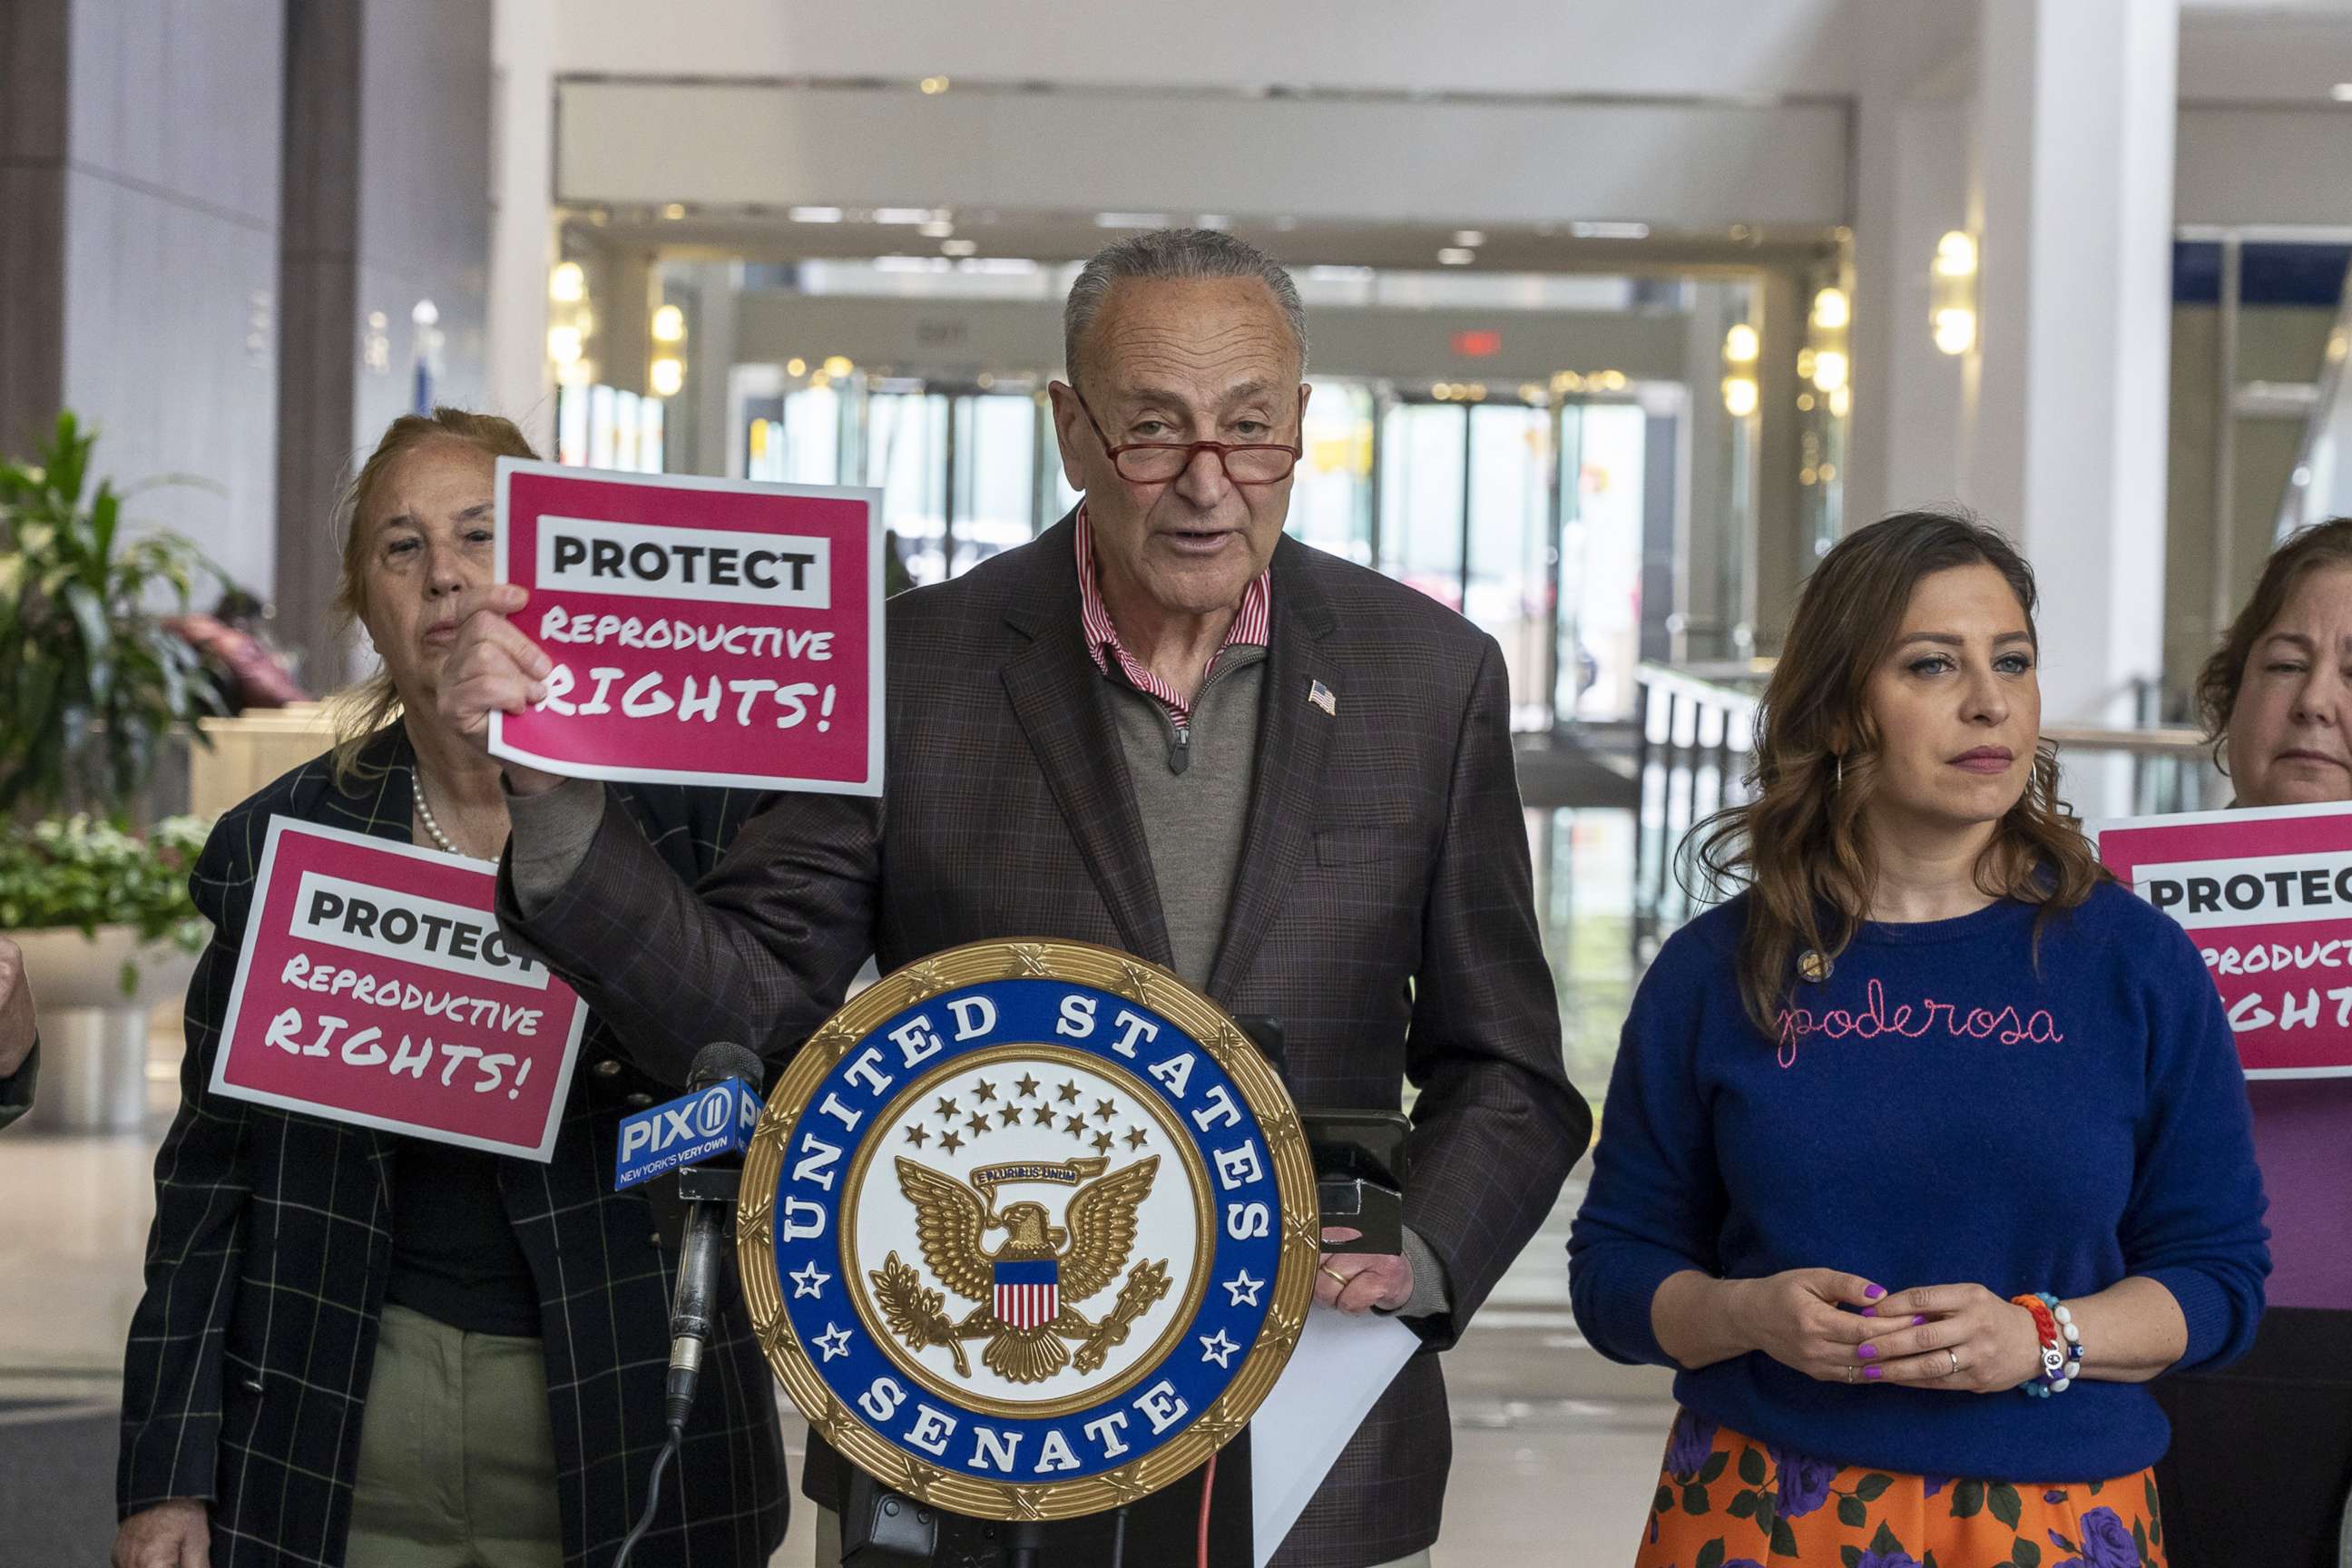 PHOTO: Senate Majority Leader, Sen. Chuck Schumer announces details in his fight to codify a woman's right to choose, specifically the Senate vote he will hold on Wednesday, May 11, on May 8, 2022, in New York.